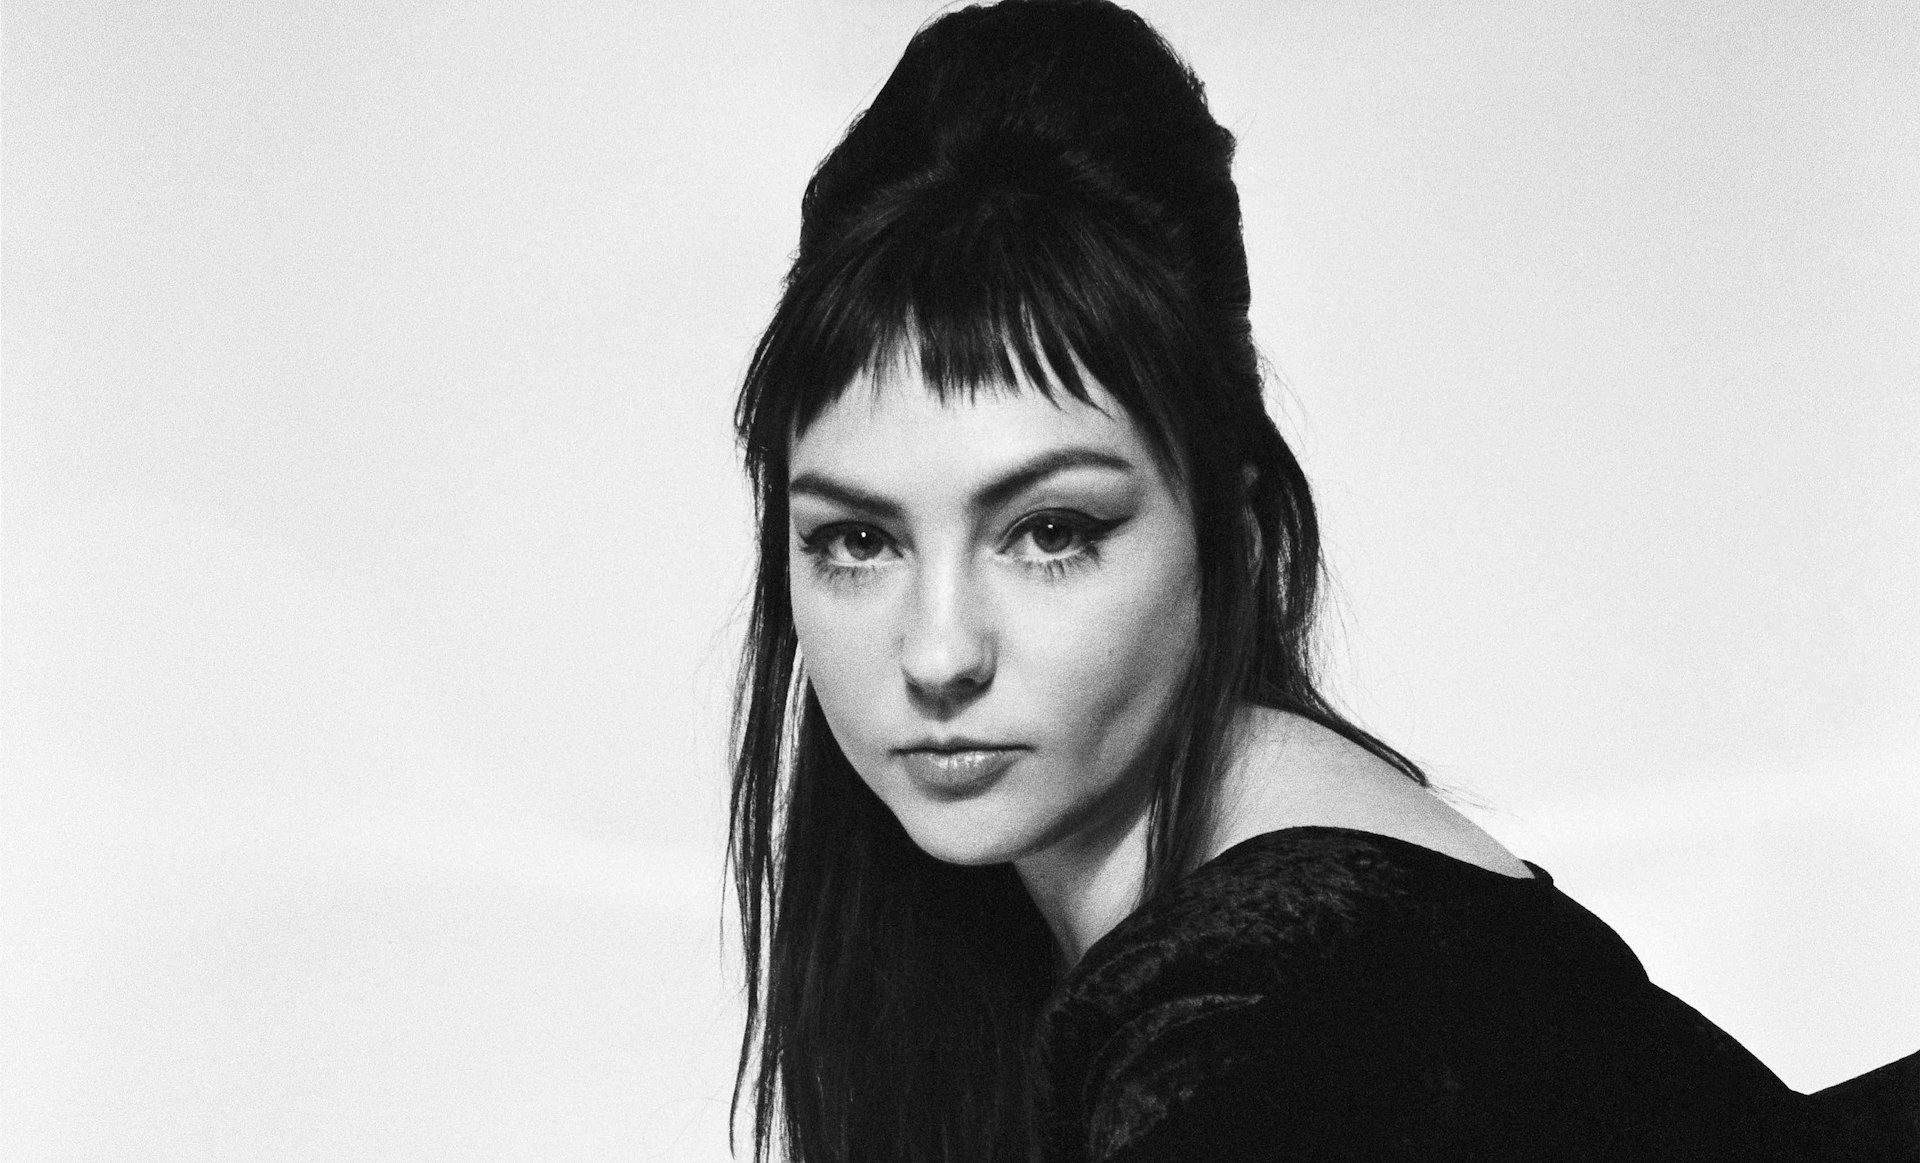 Welcome to Angel Olsen’s second act